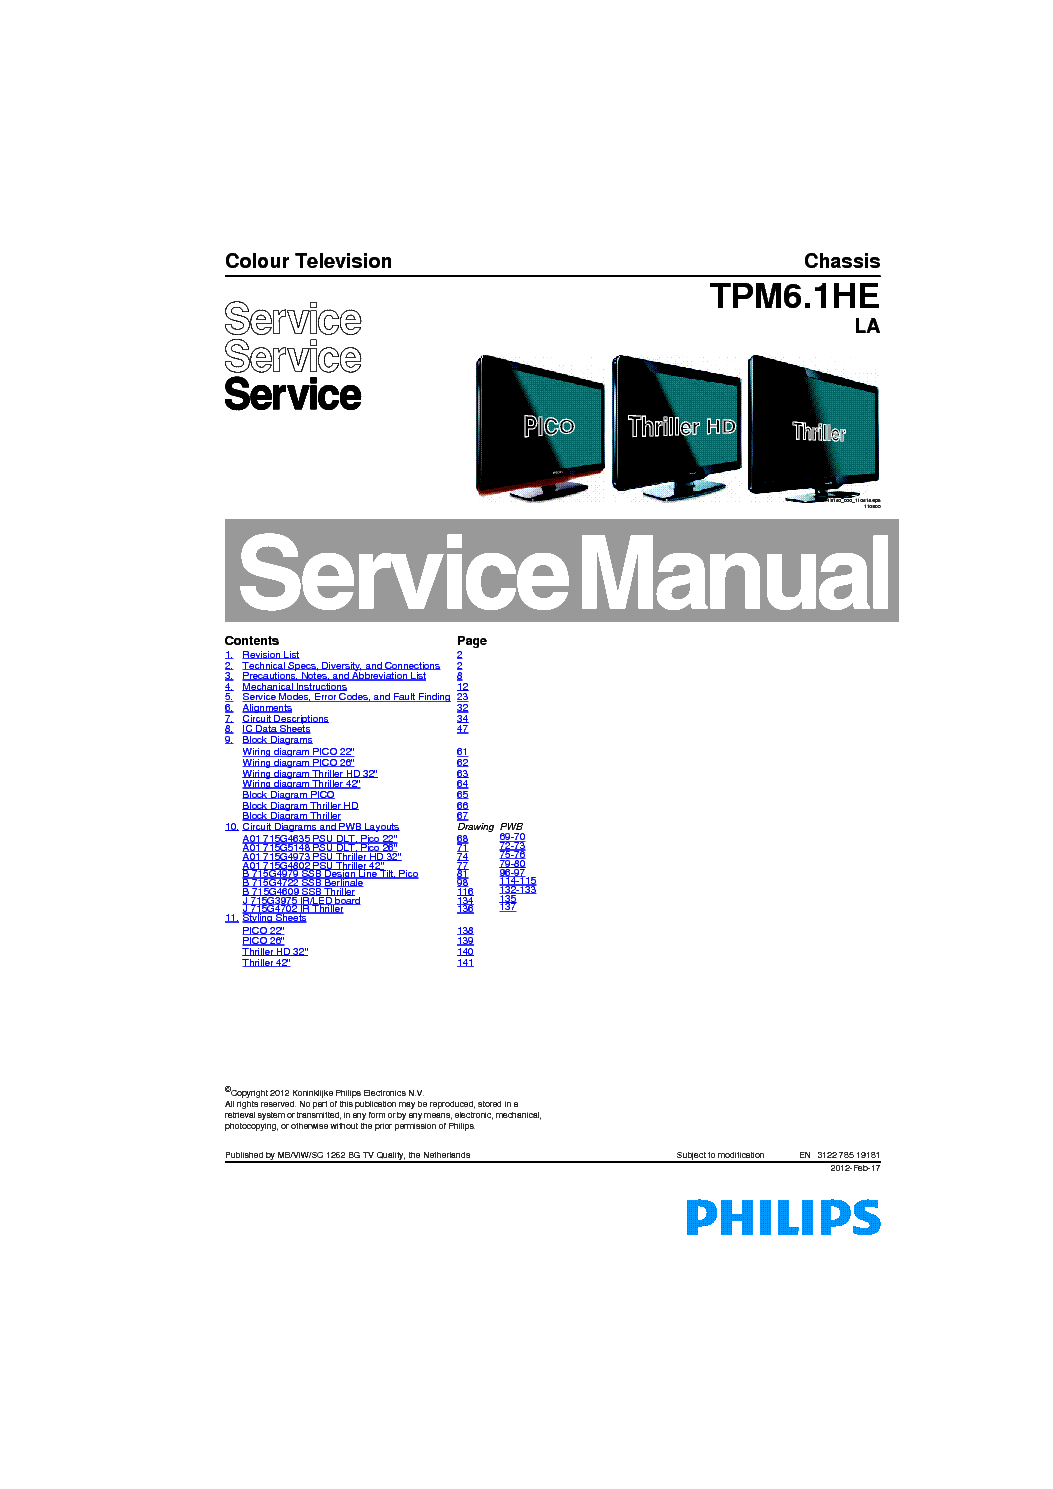 PHILIPS TPM6.1HELA 312278519181 service manual (1st page)